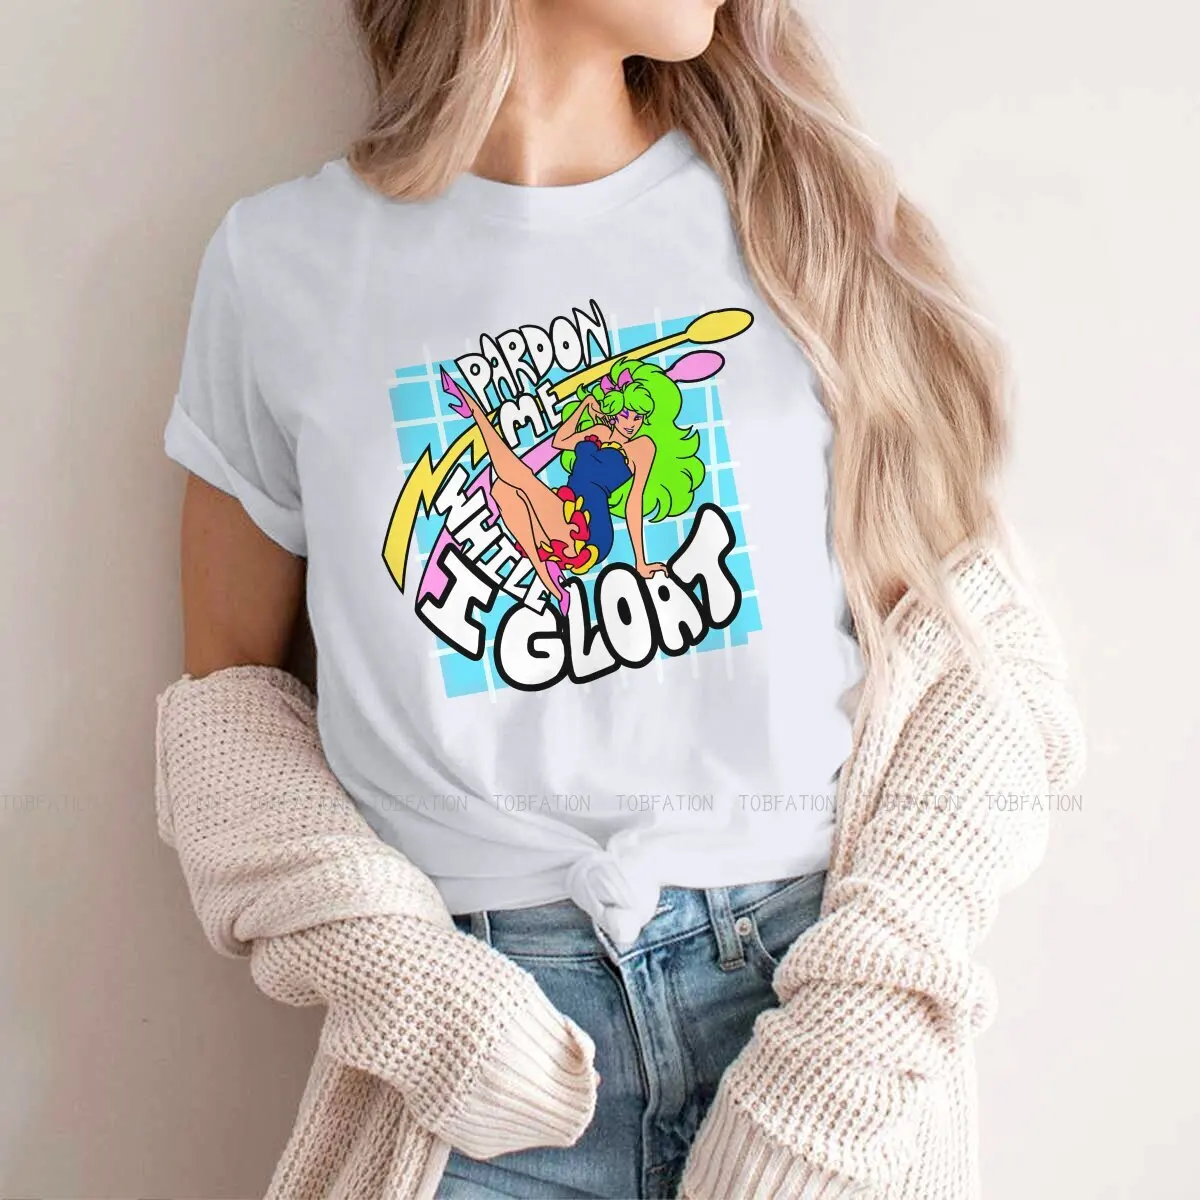 Pardon Me While I Gloat Classic TShirt For Women Jem And The Holograms TV Tops Fashion Ladies T Shirt Basic Summer Loose